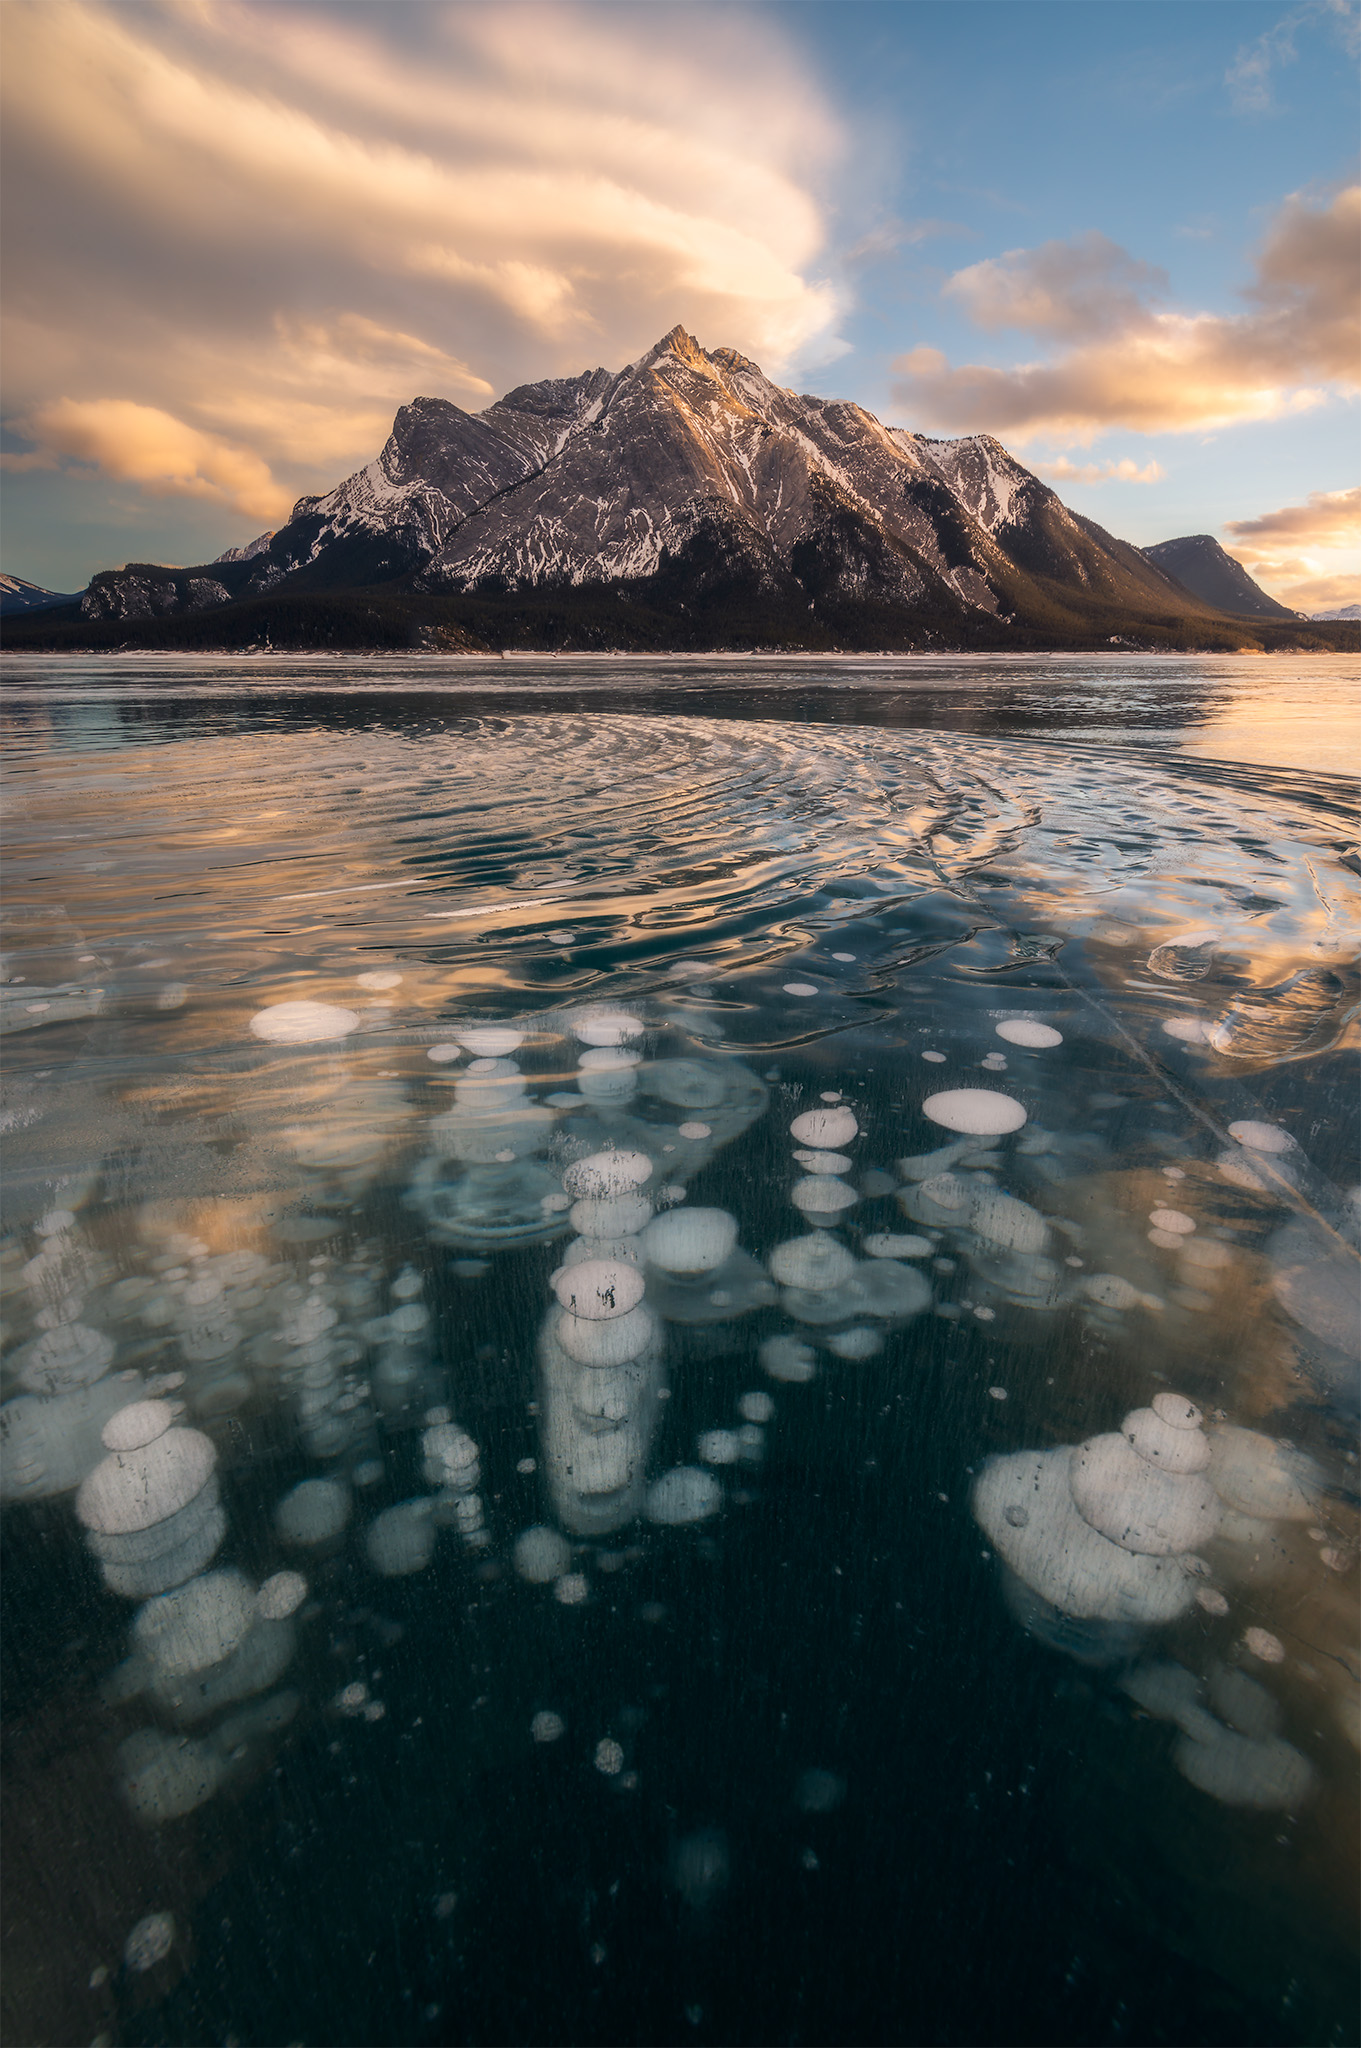 A landscape photograph of Abraham Lake at sunset with a lenticular cloud over Mount Michener and frozen methane bubbles